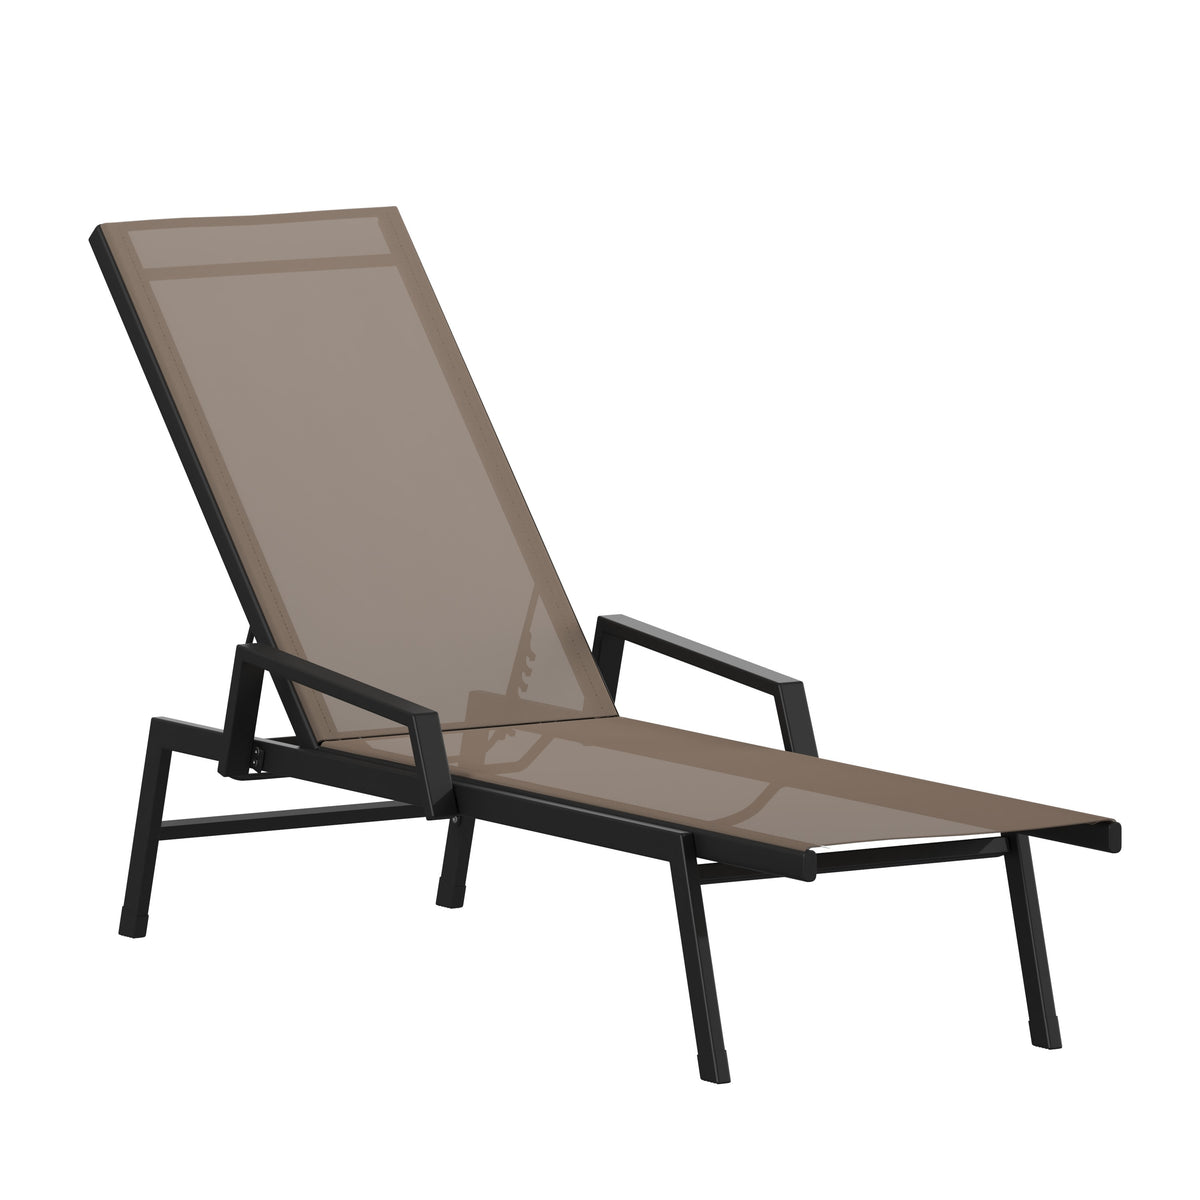 Brown |#| All-Weather Textilene Adjustable Chaise Lounge Chair with Arms - Black/Brown